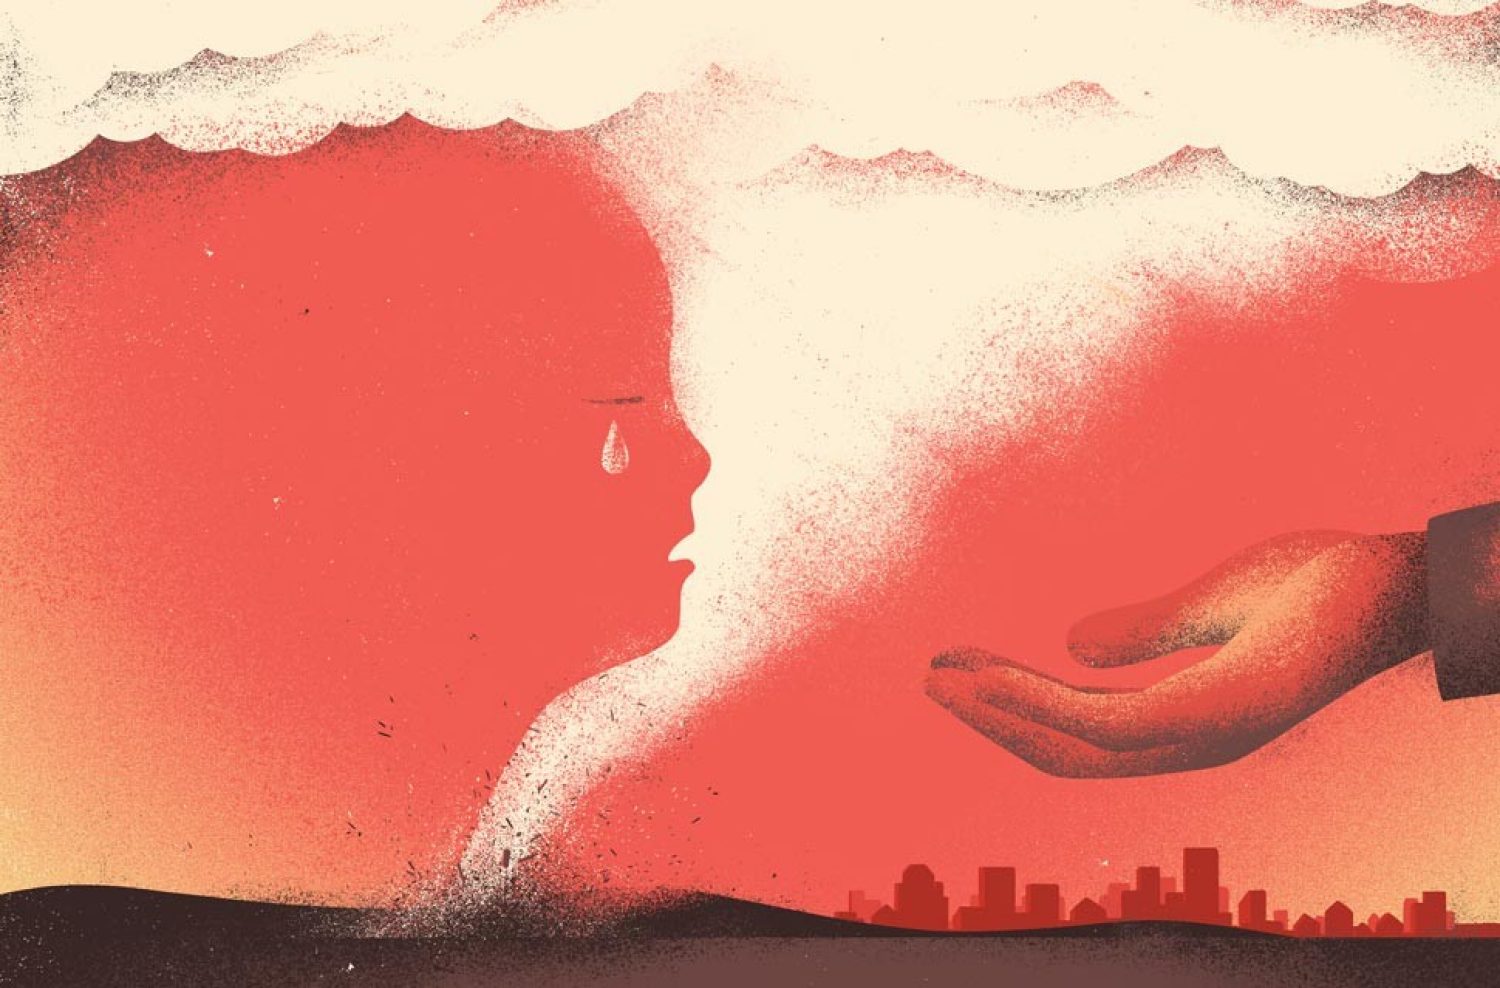 Illustration of a child's face behind behind a tornado opposite a hand reaching out to help